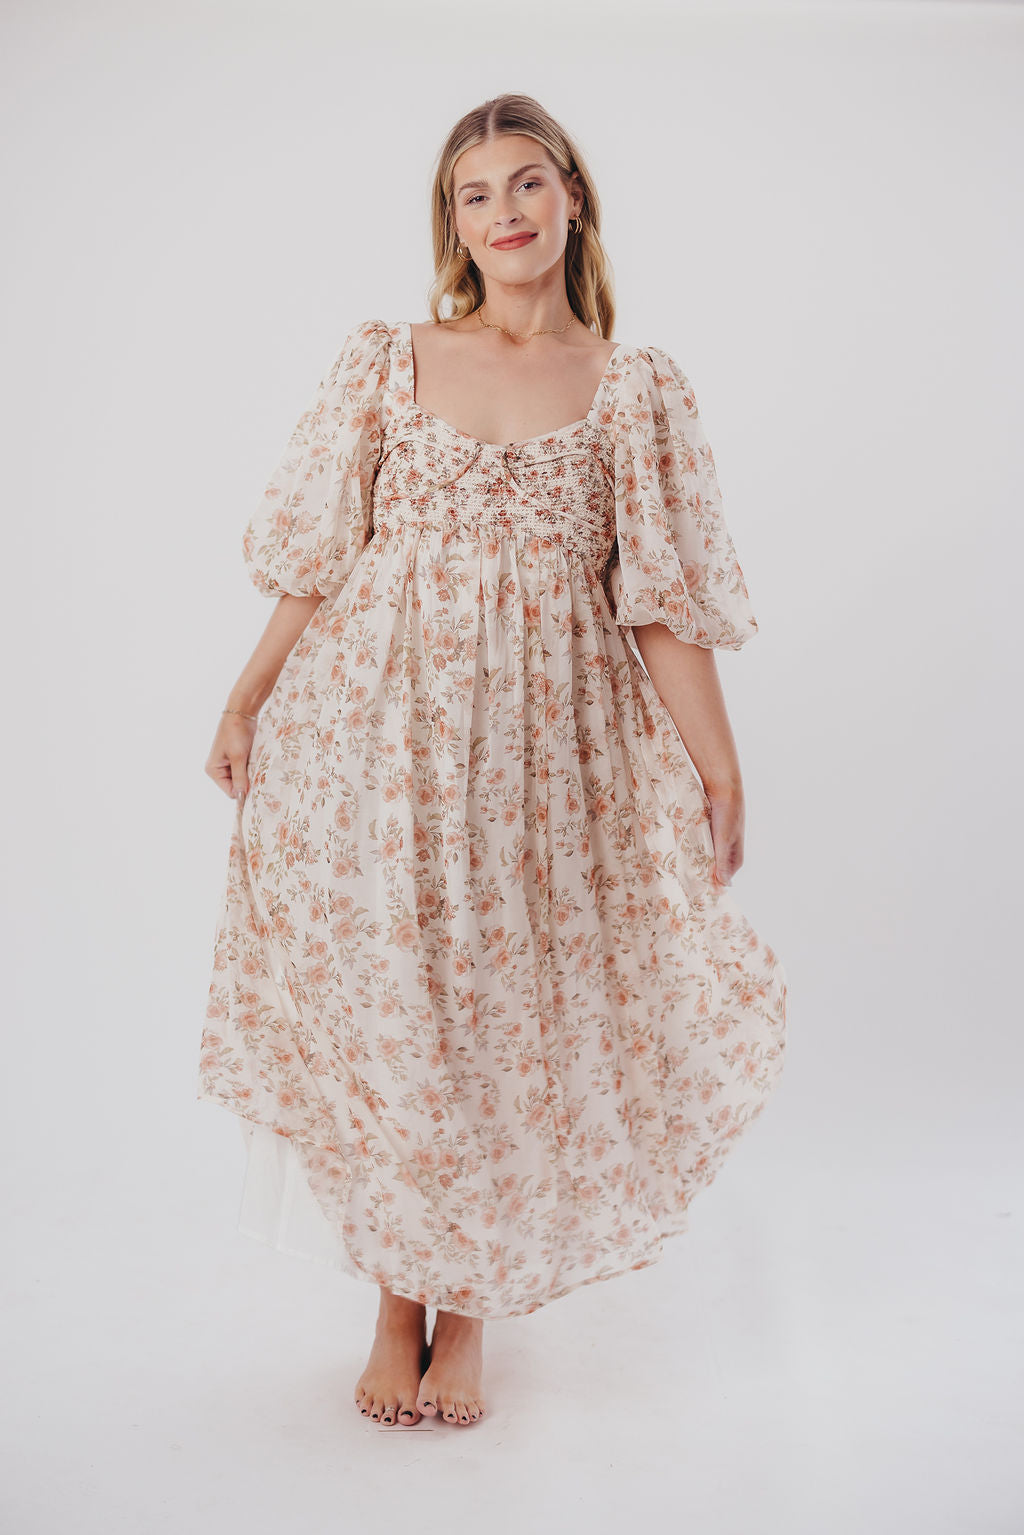 Harlow Maxi Dress in Ivory Floral - Bump Friendly & Inclusive Sizing (S-3XL)